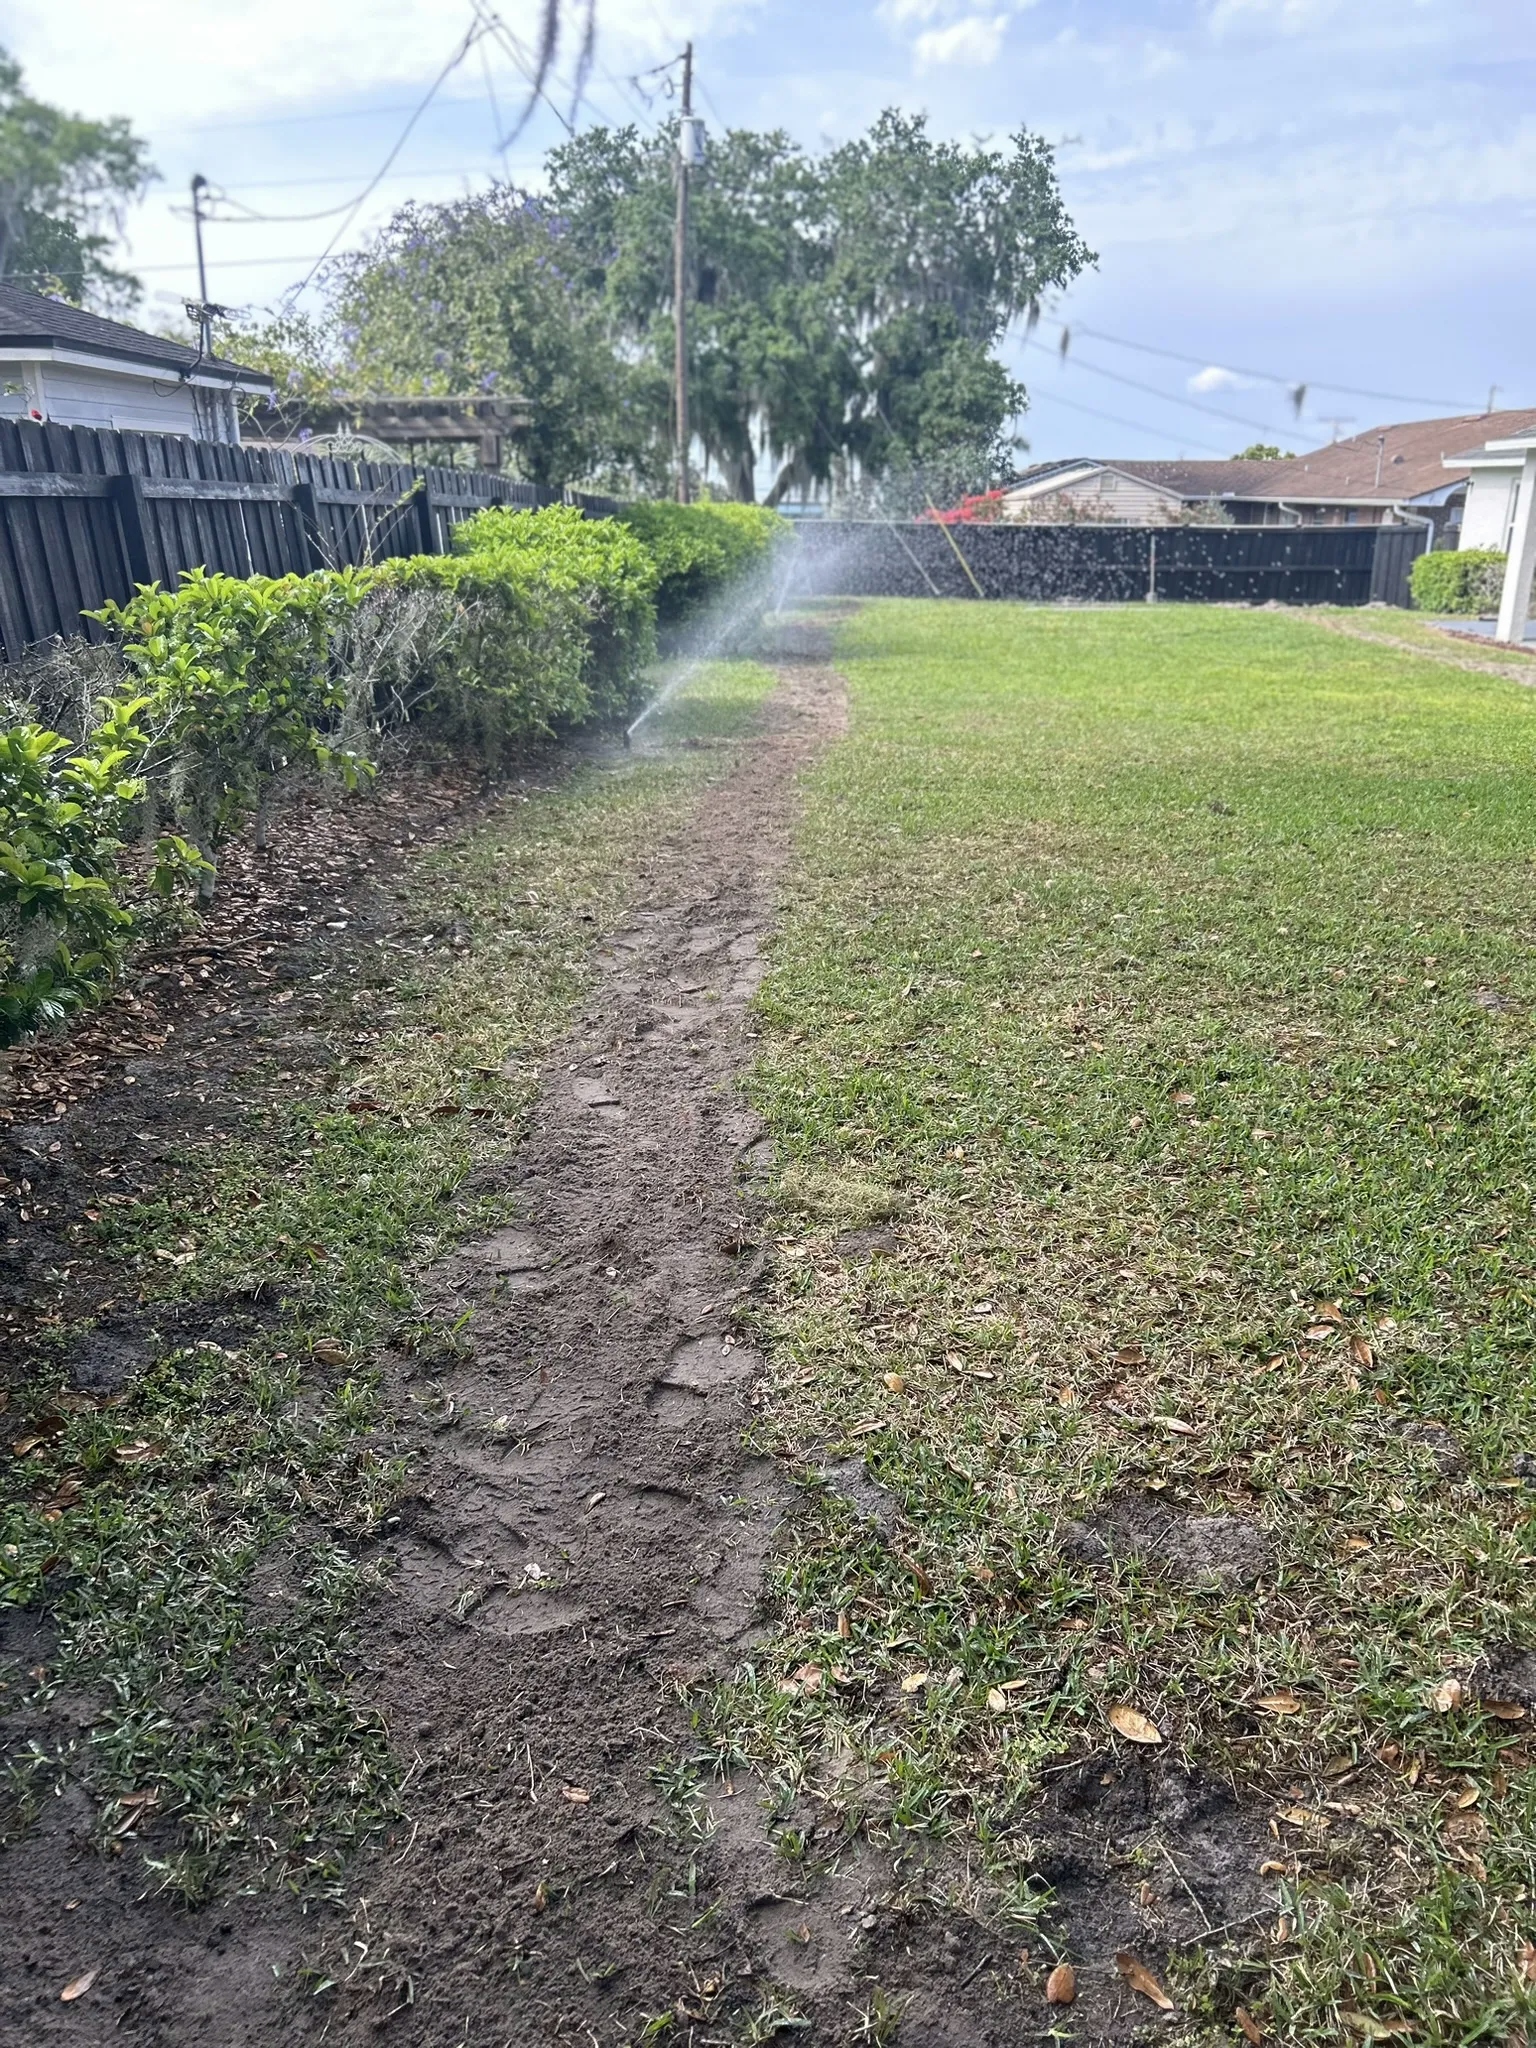 A residential sprinkler system waters a lush green lawn on a sunny day.